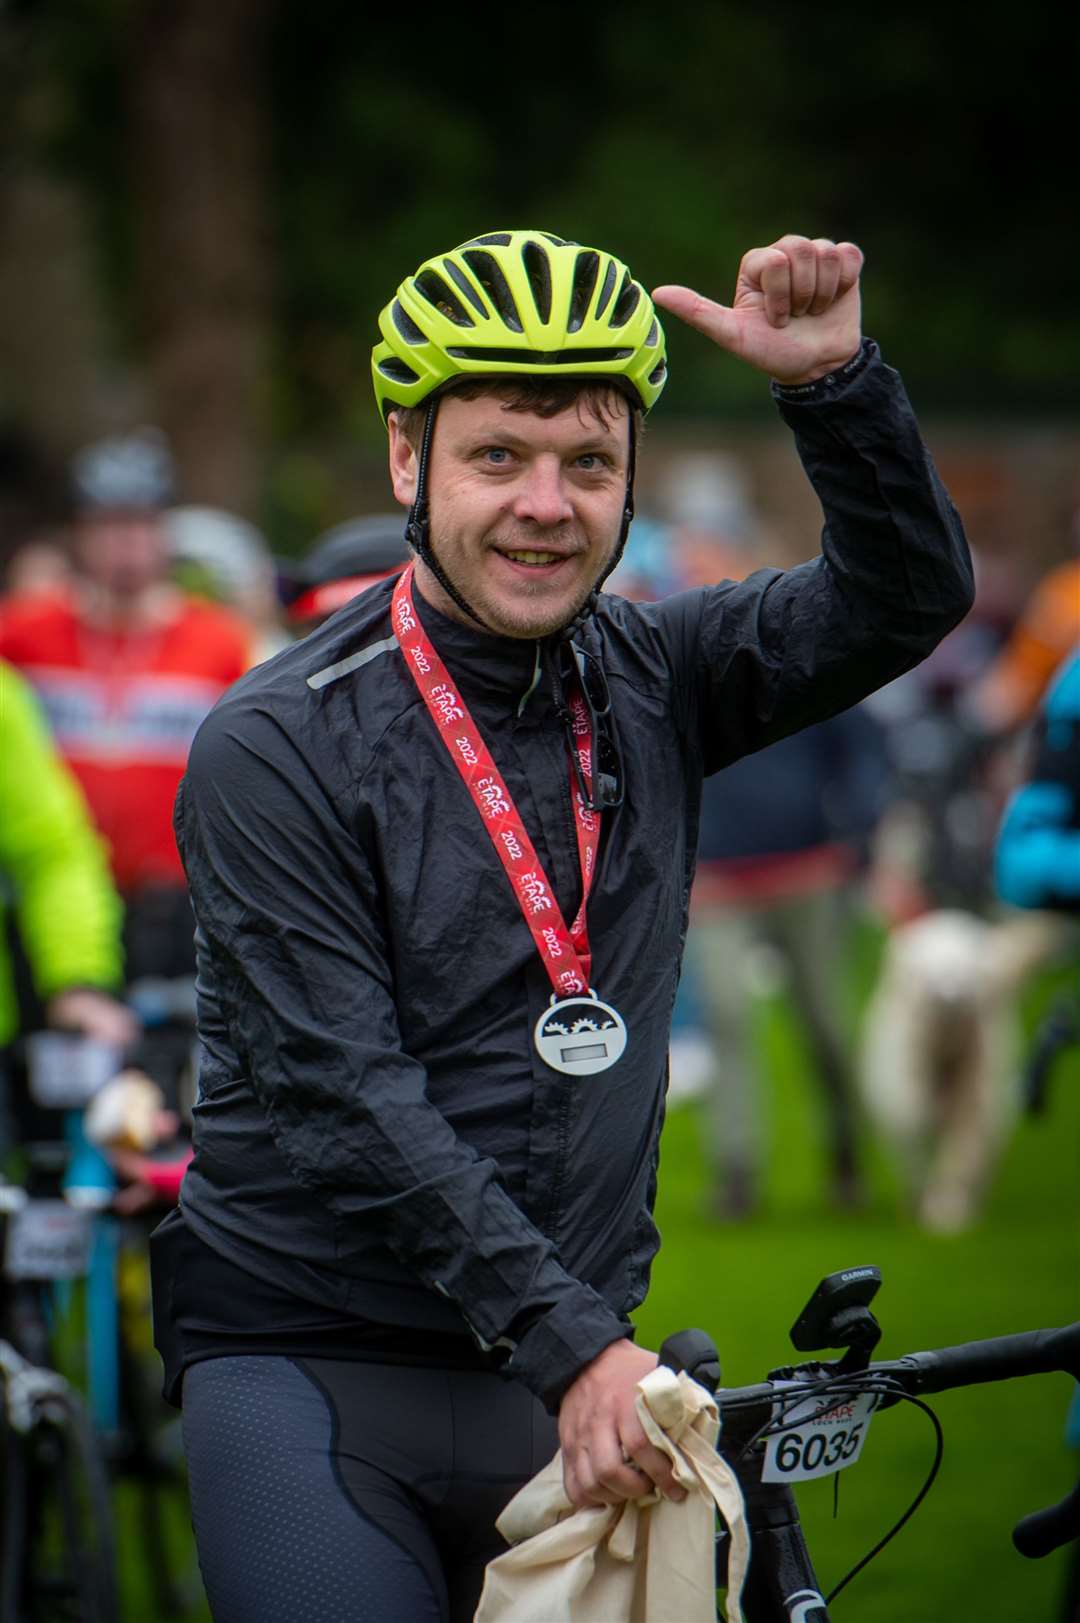 A finisher looking chuffed.